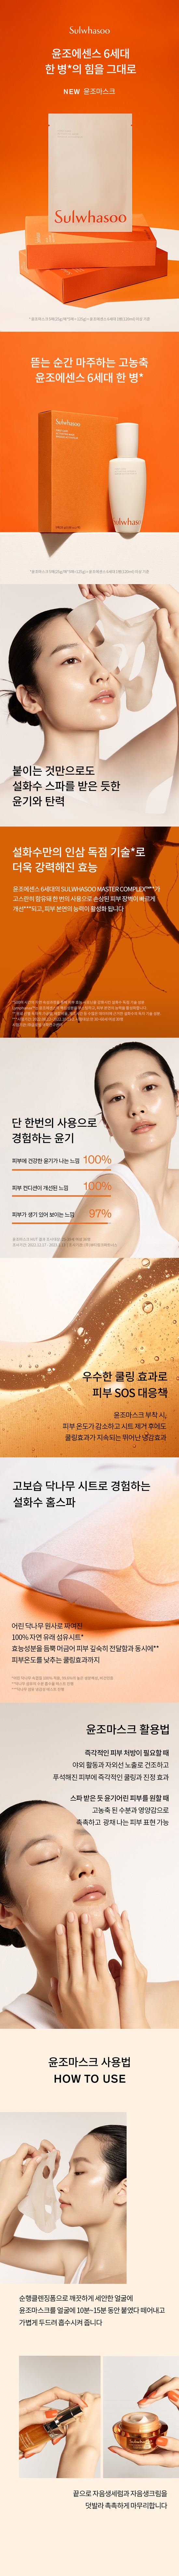 sulwhasoo-first-care-activating-mask-2023-info.jpg